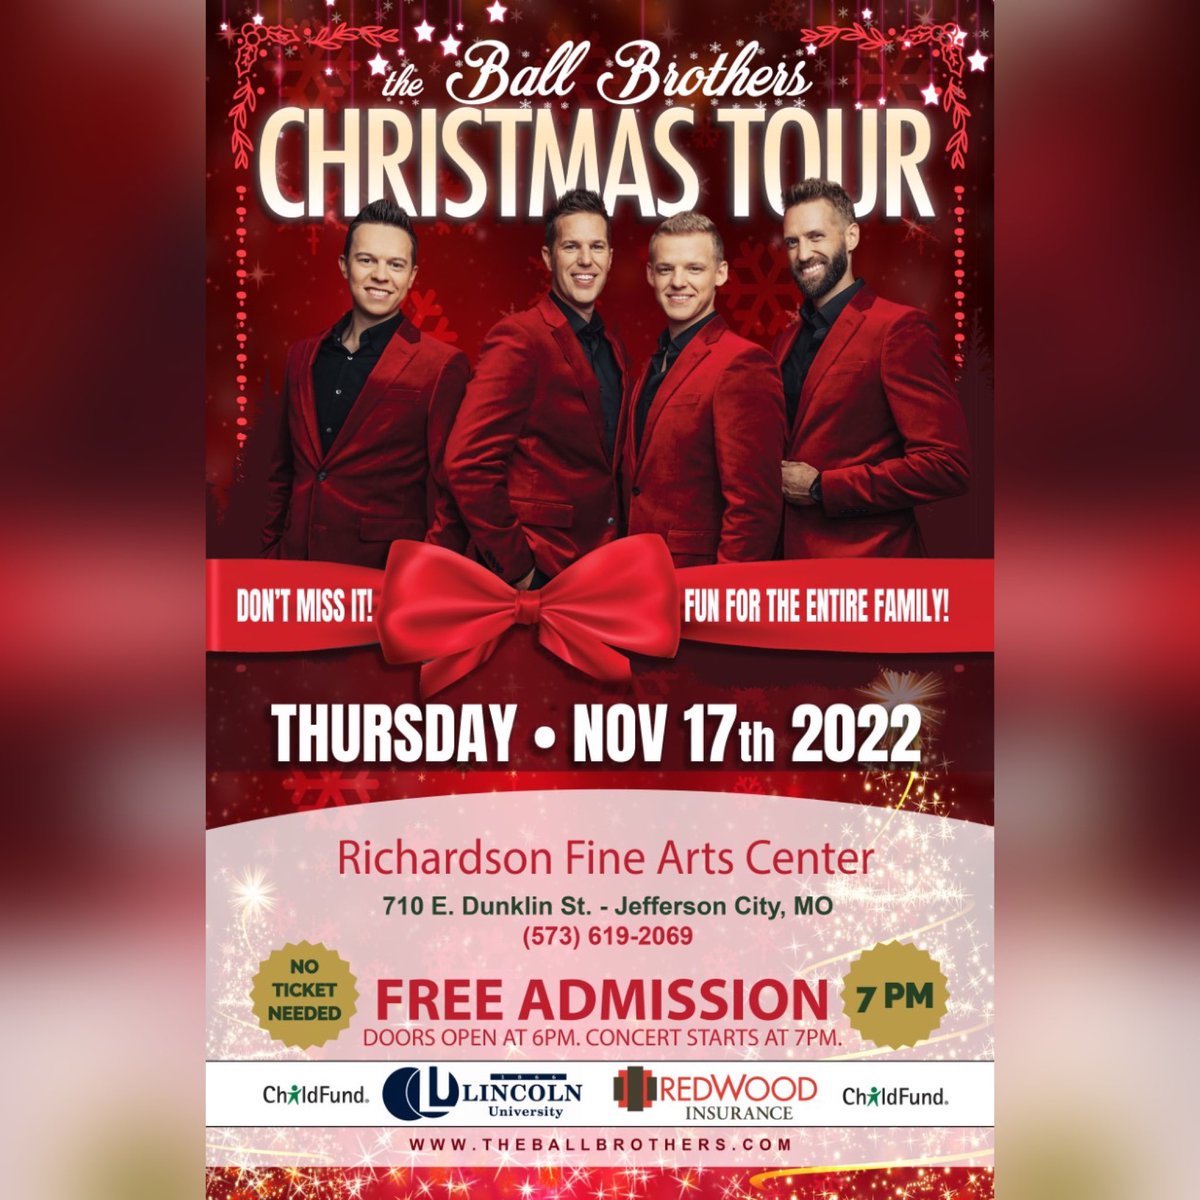 ✨🎩❄️🎼 Mark your calendars for the @theballbrothers Christmas Tour, November 17 at Richardson Fine Arts Center. This entertaining evening of chart-topping Christian Gospel will be fun for the entire family! #christmas #Holidays #christian #music #gospel #concerts #events